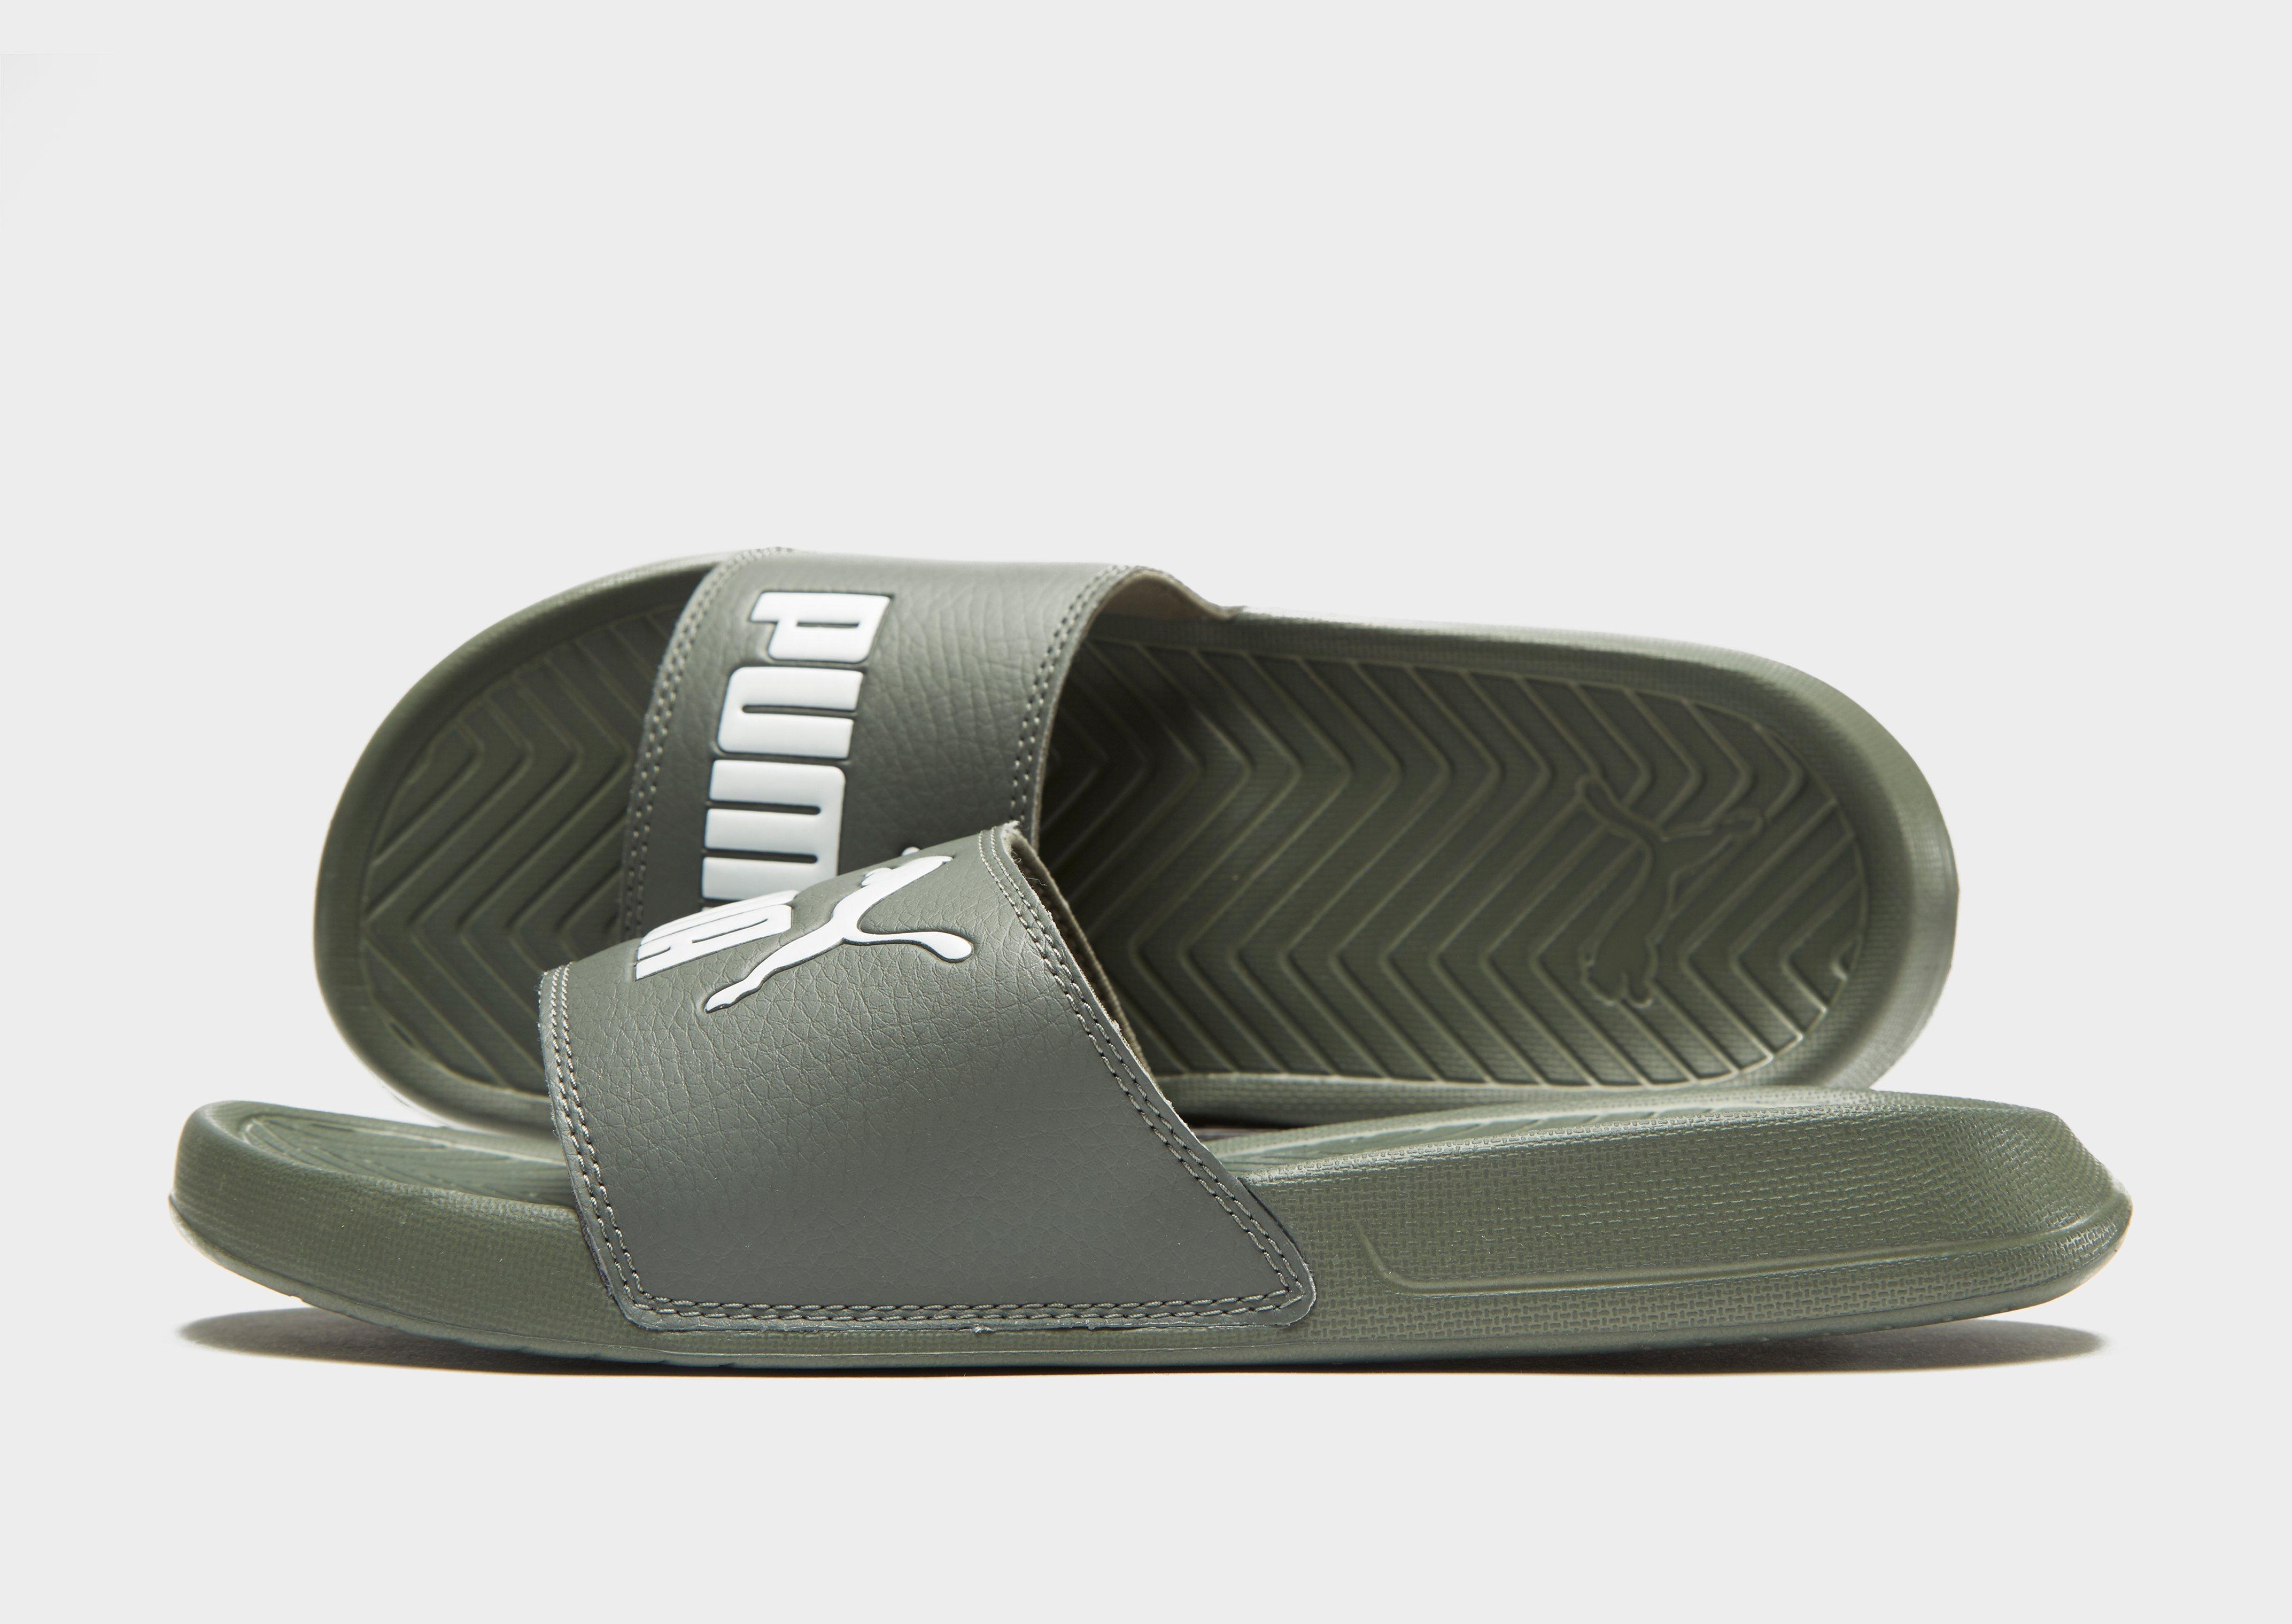 PUMA Synthetic Popcat Slides in Green 